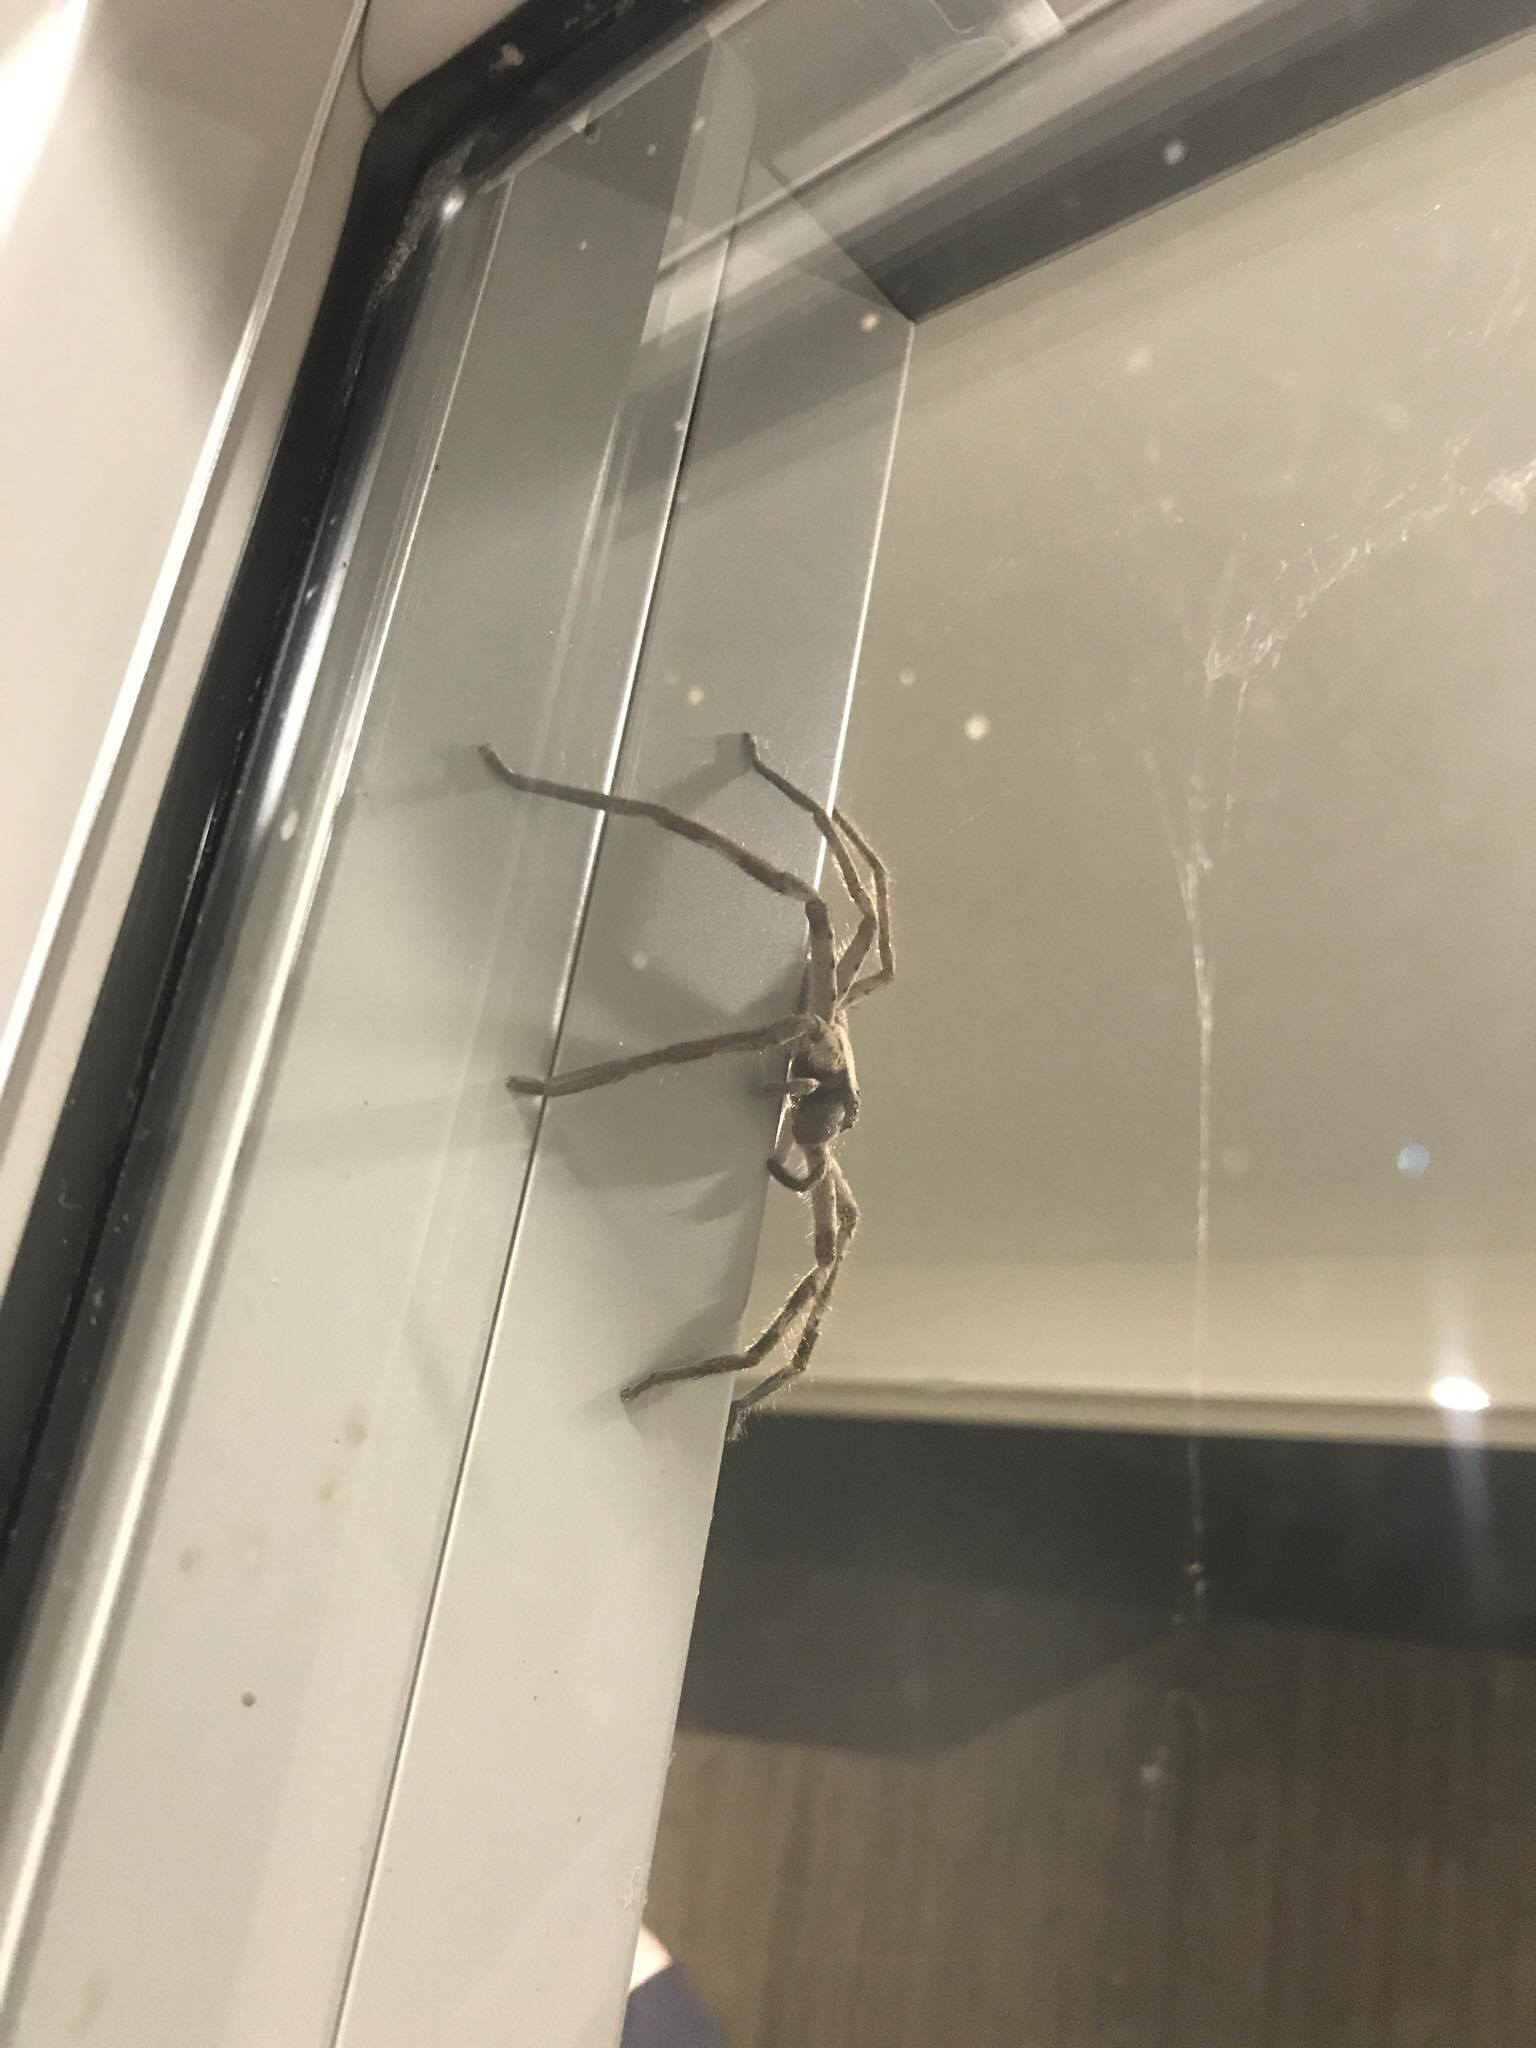 PHOTO: Lauren Ansell spotted this giant spider on her home's window in Mount Coolum, Queensland, Australia.